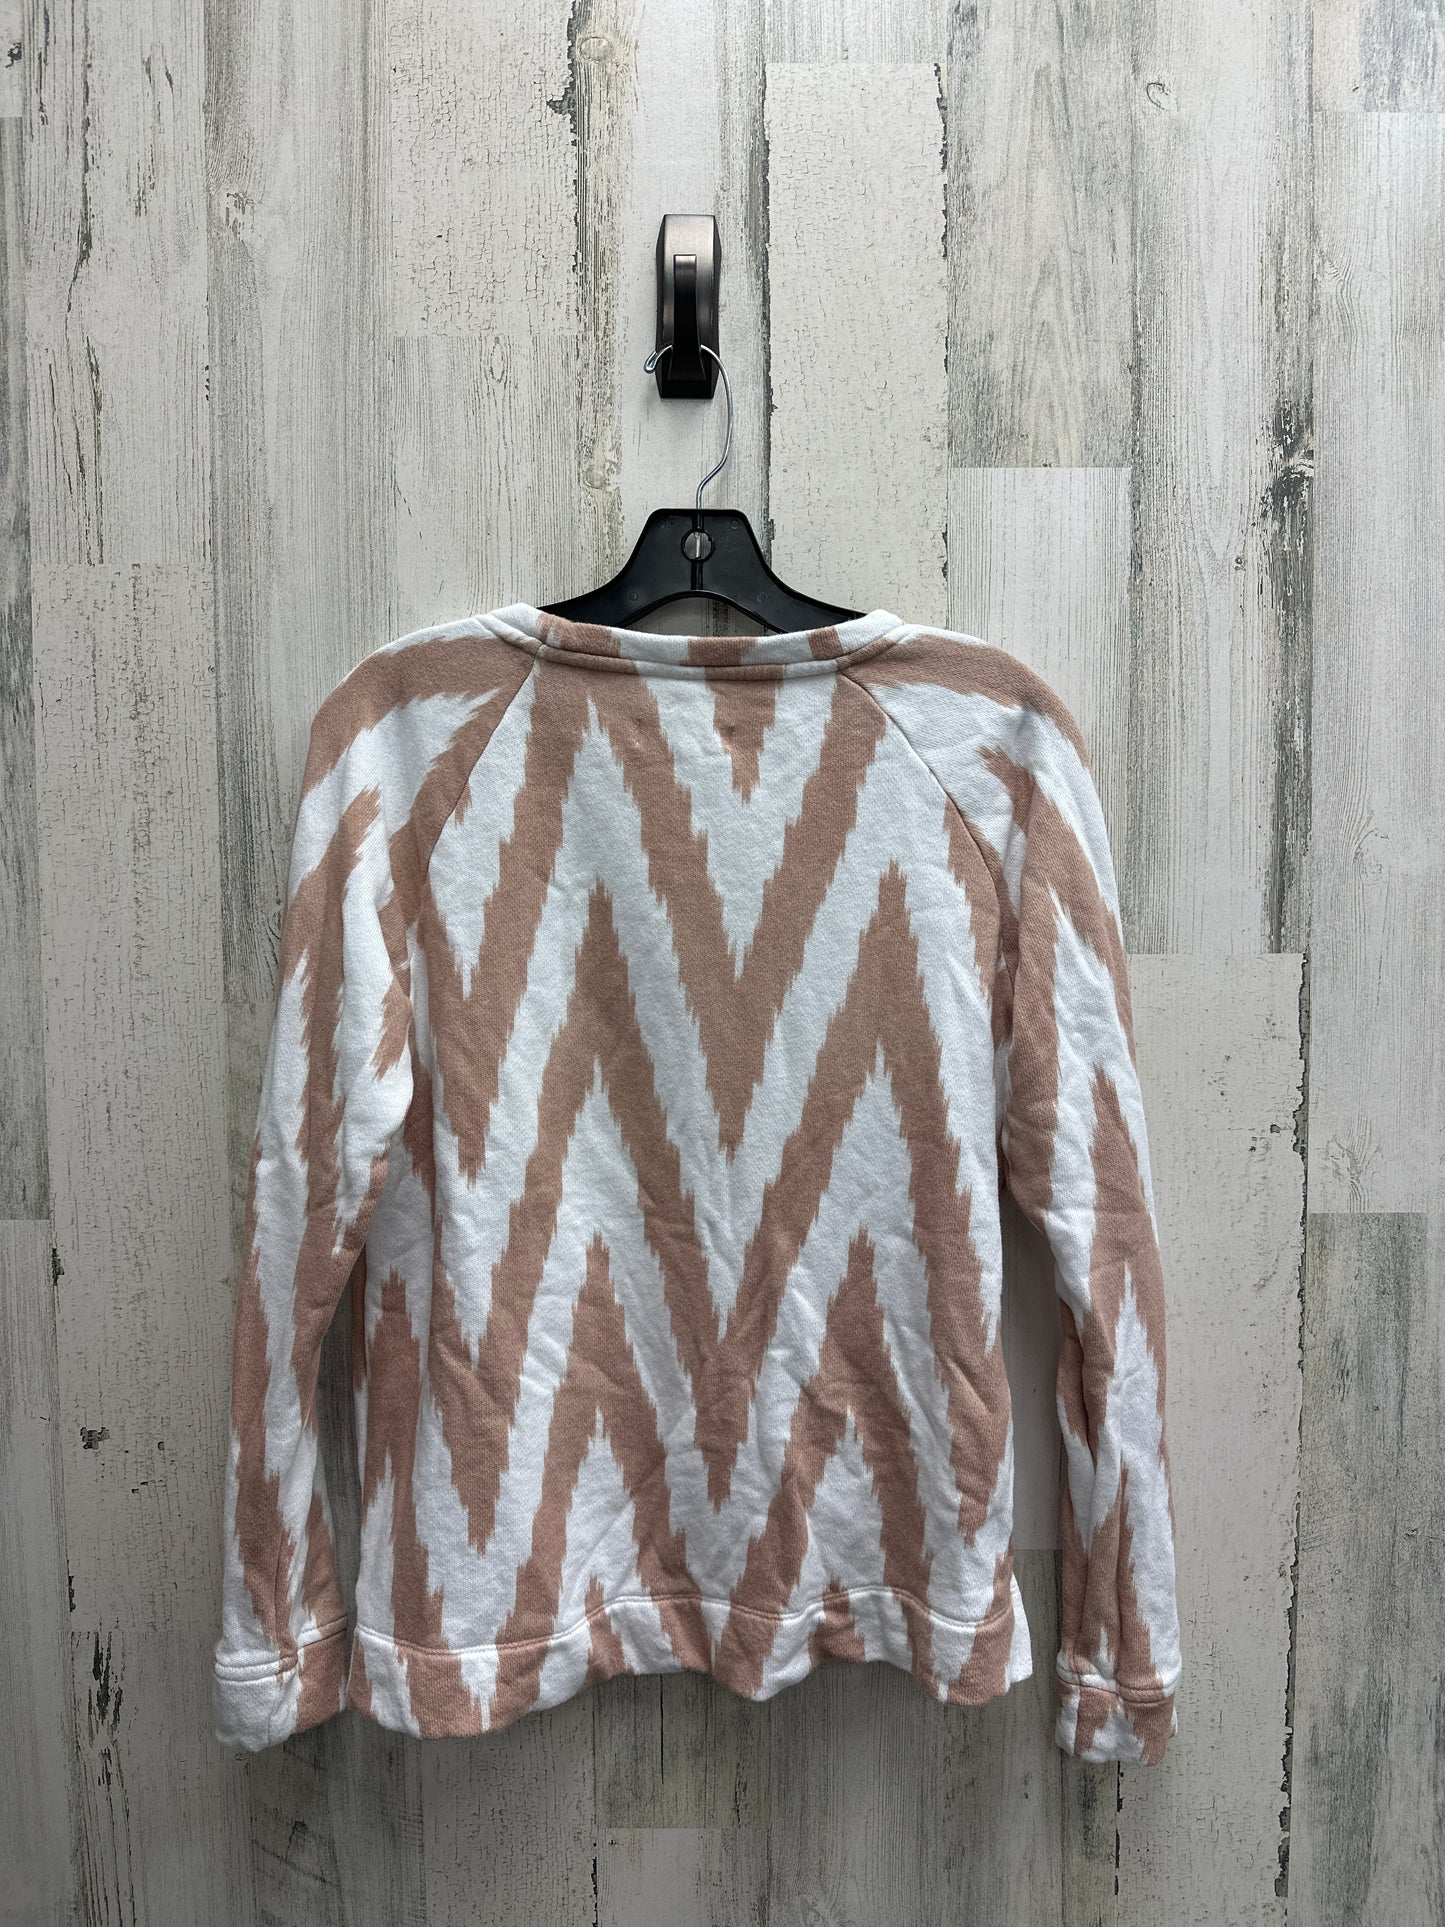 Sweater By Lou And Grey  Size: S